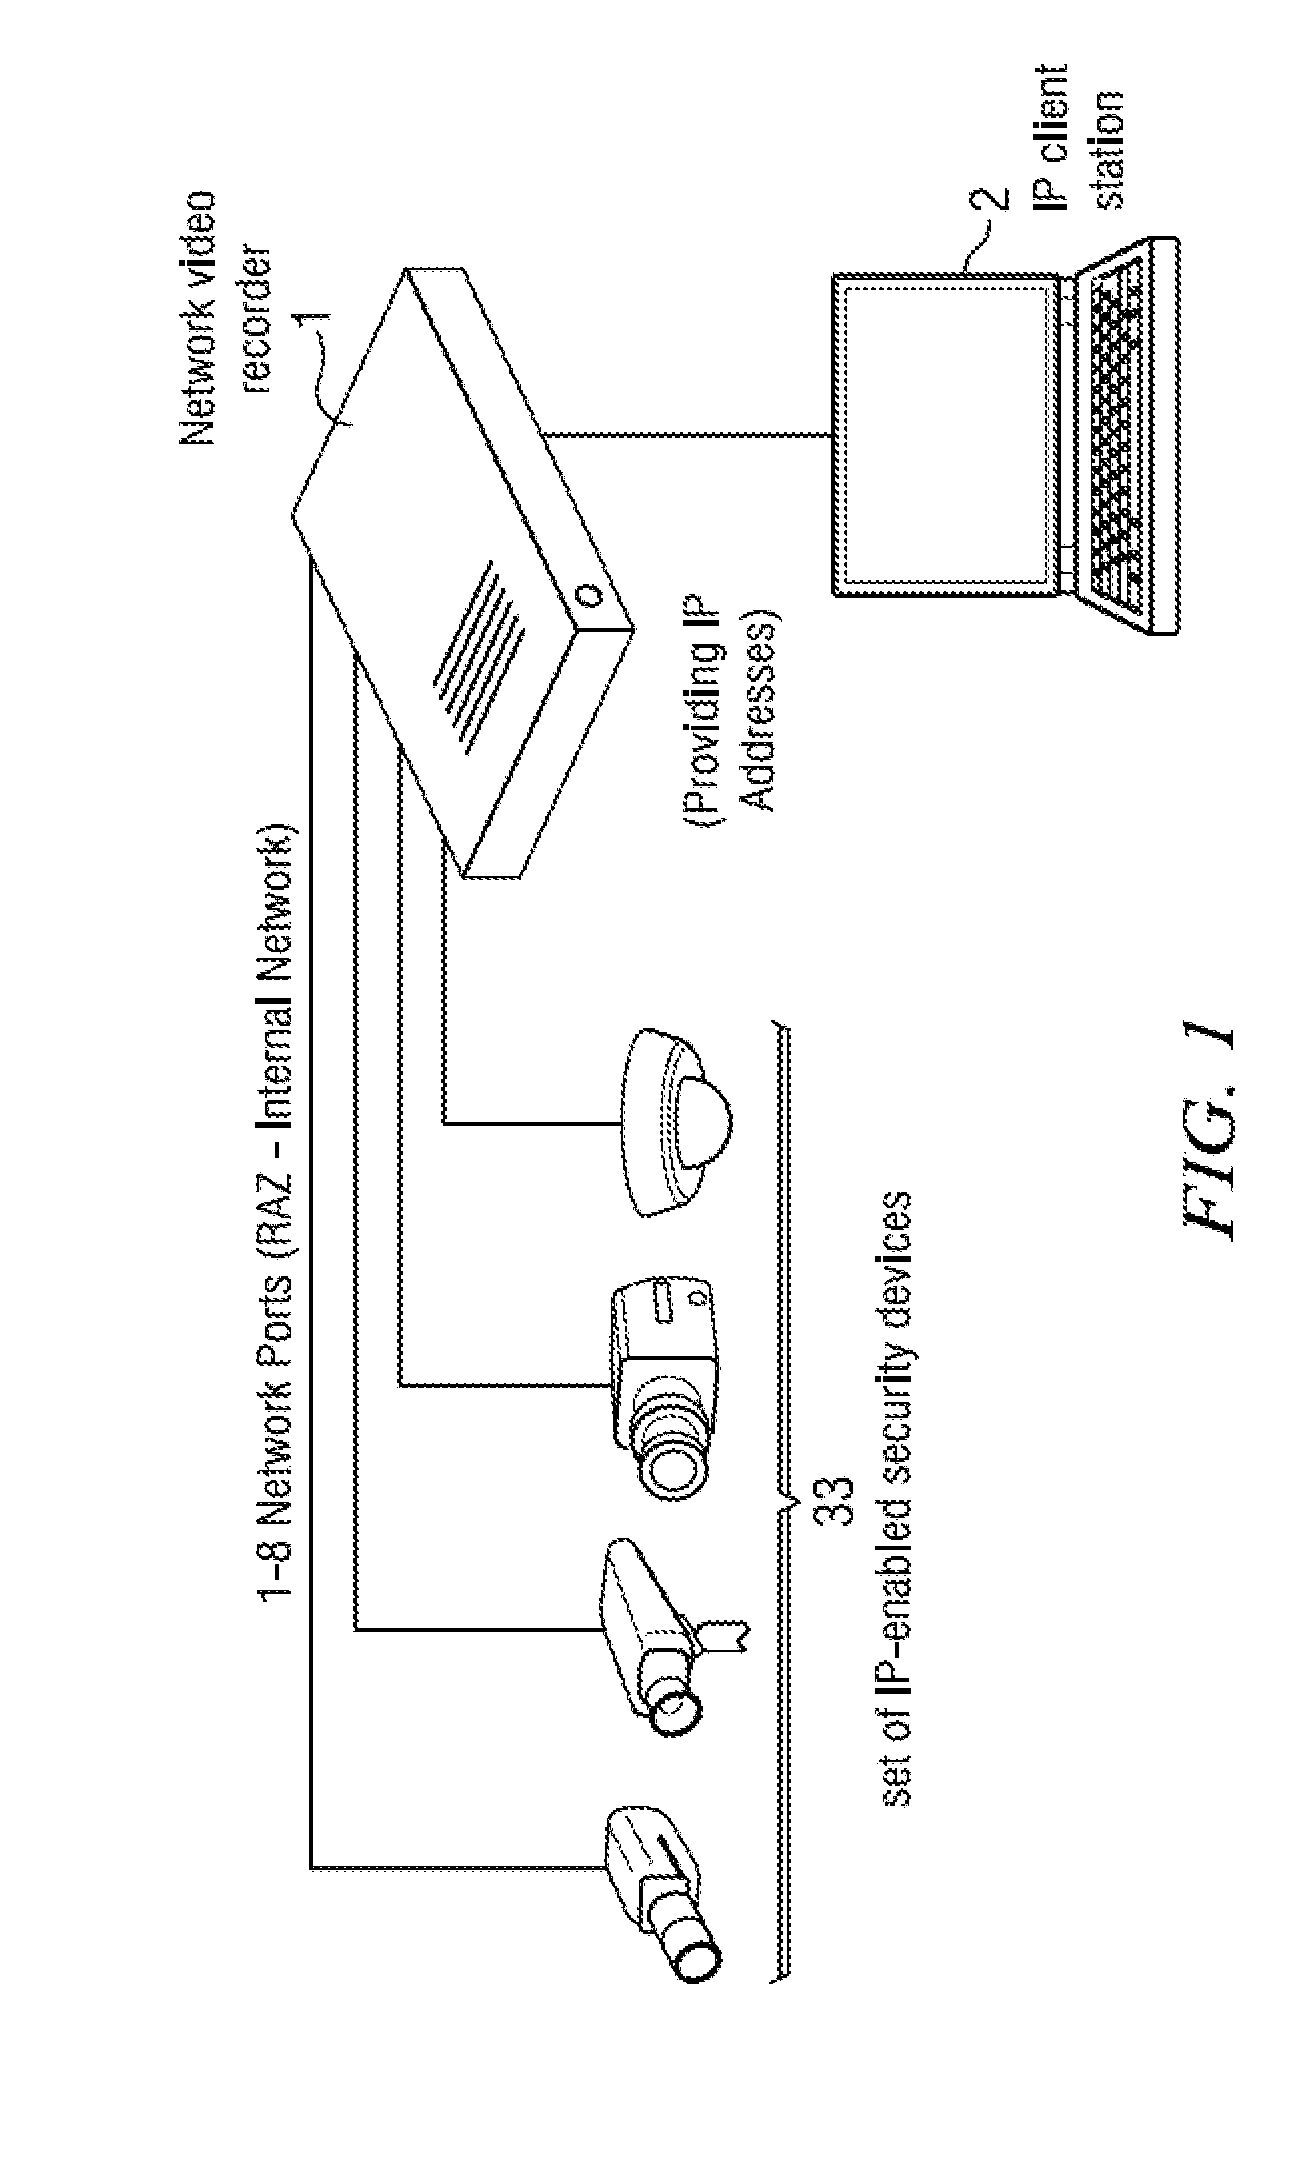 System and method for a security system